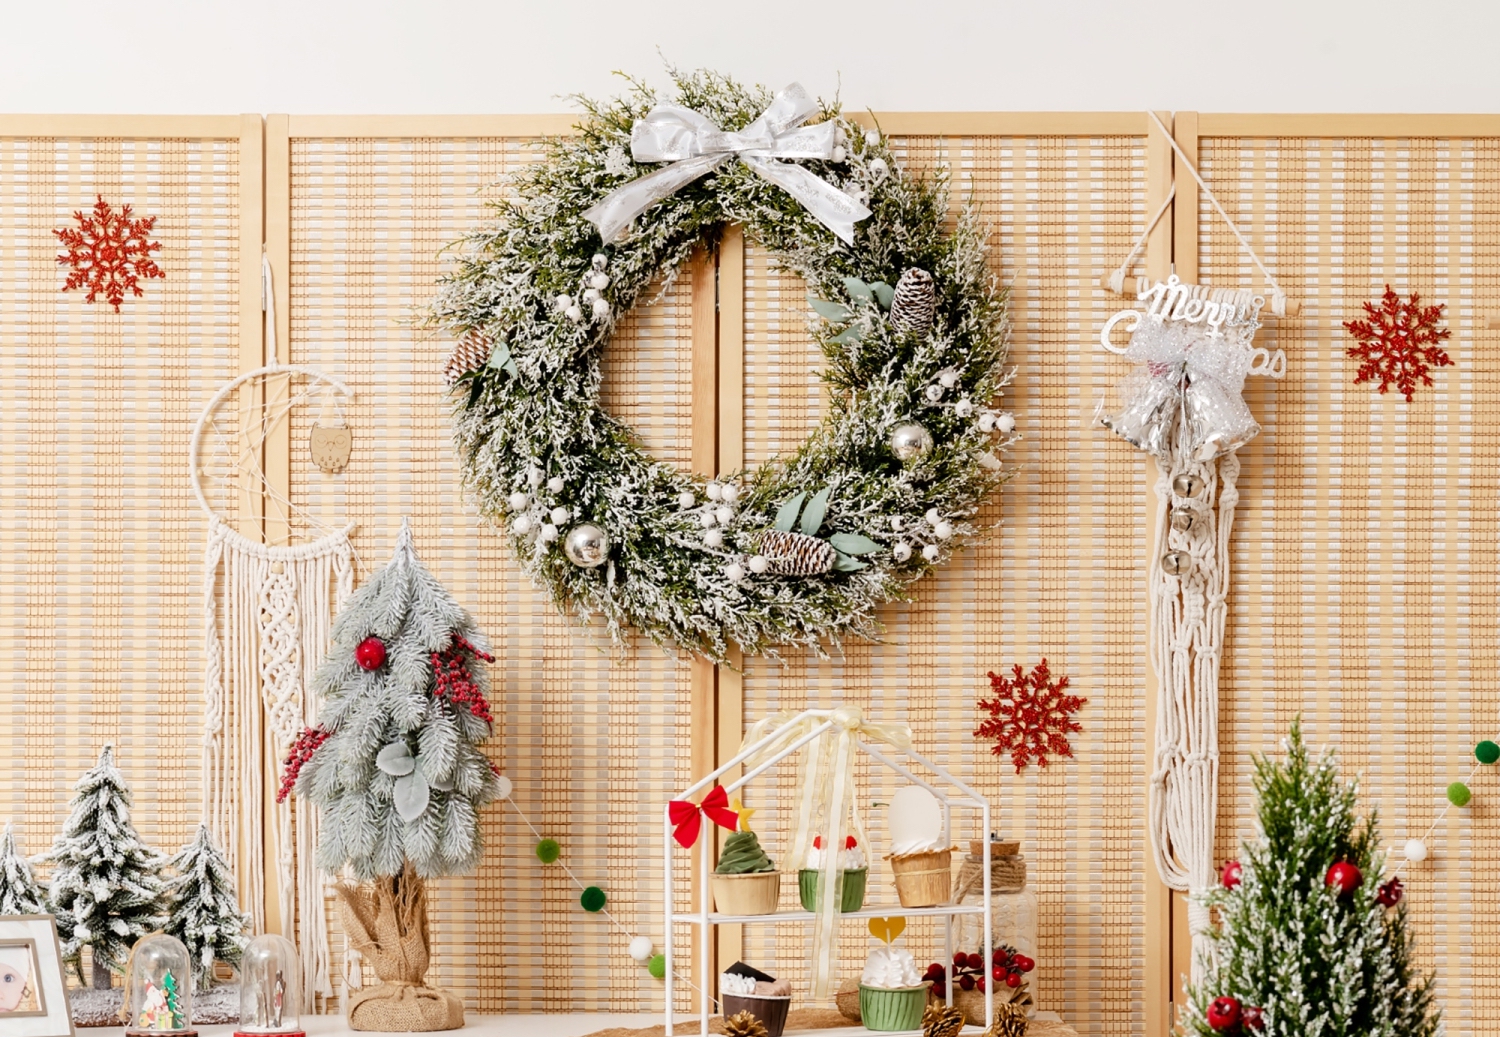 Brighten your holidays with unique themed home decor